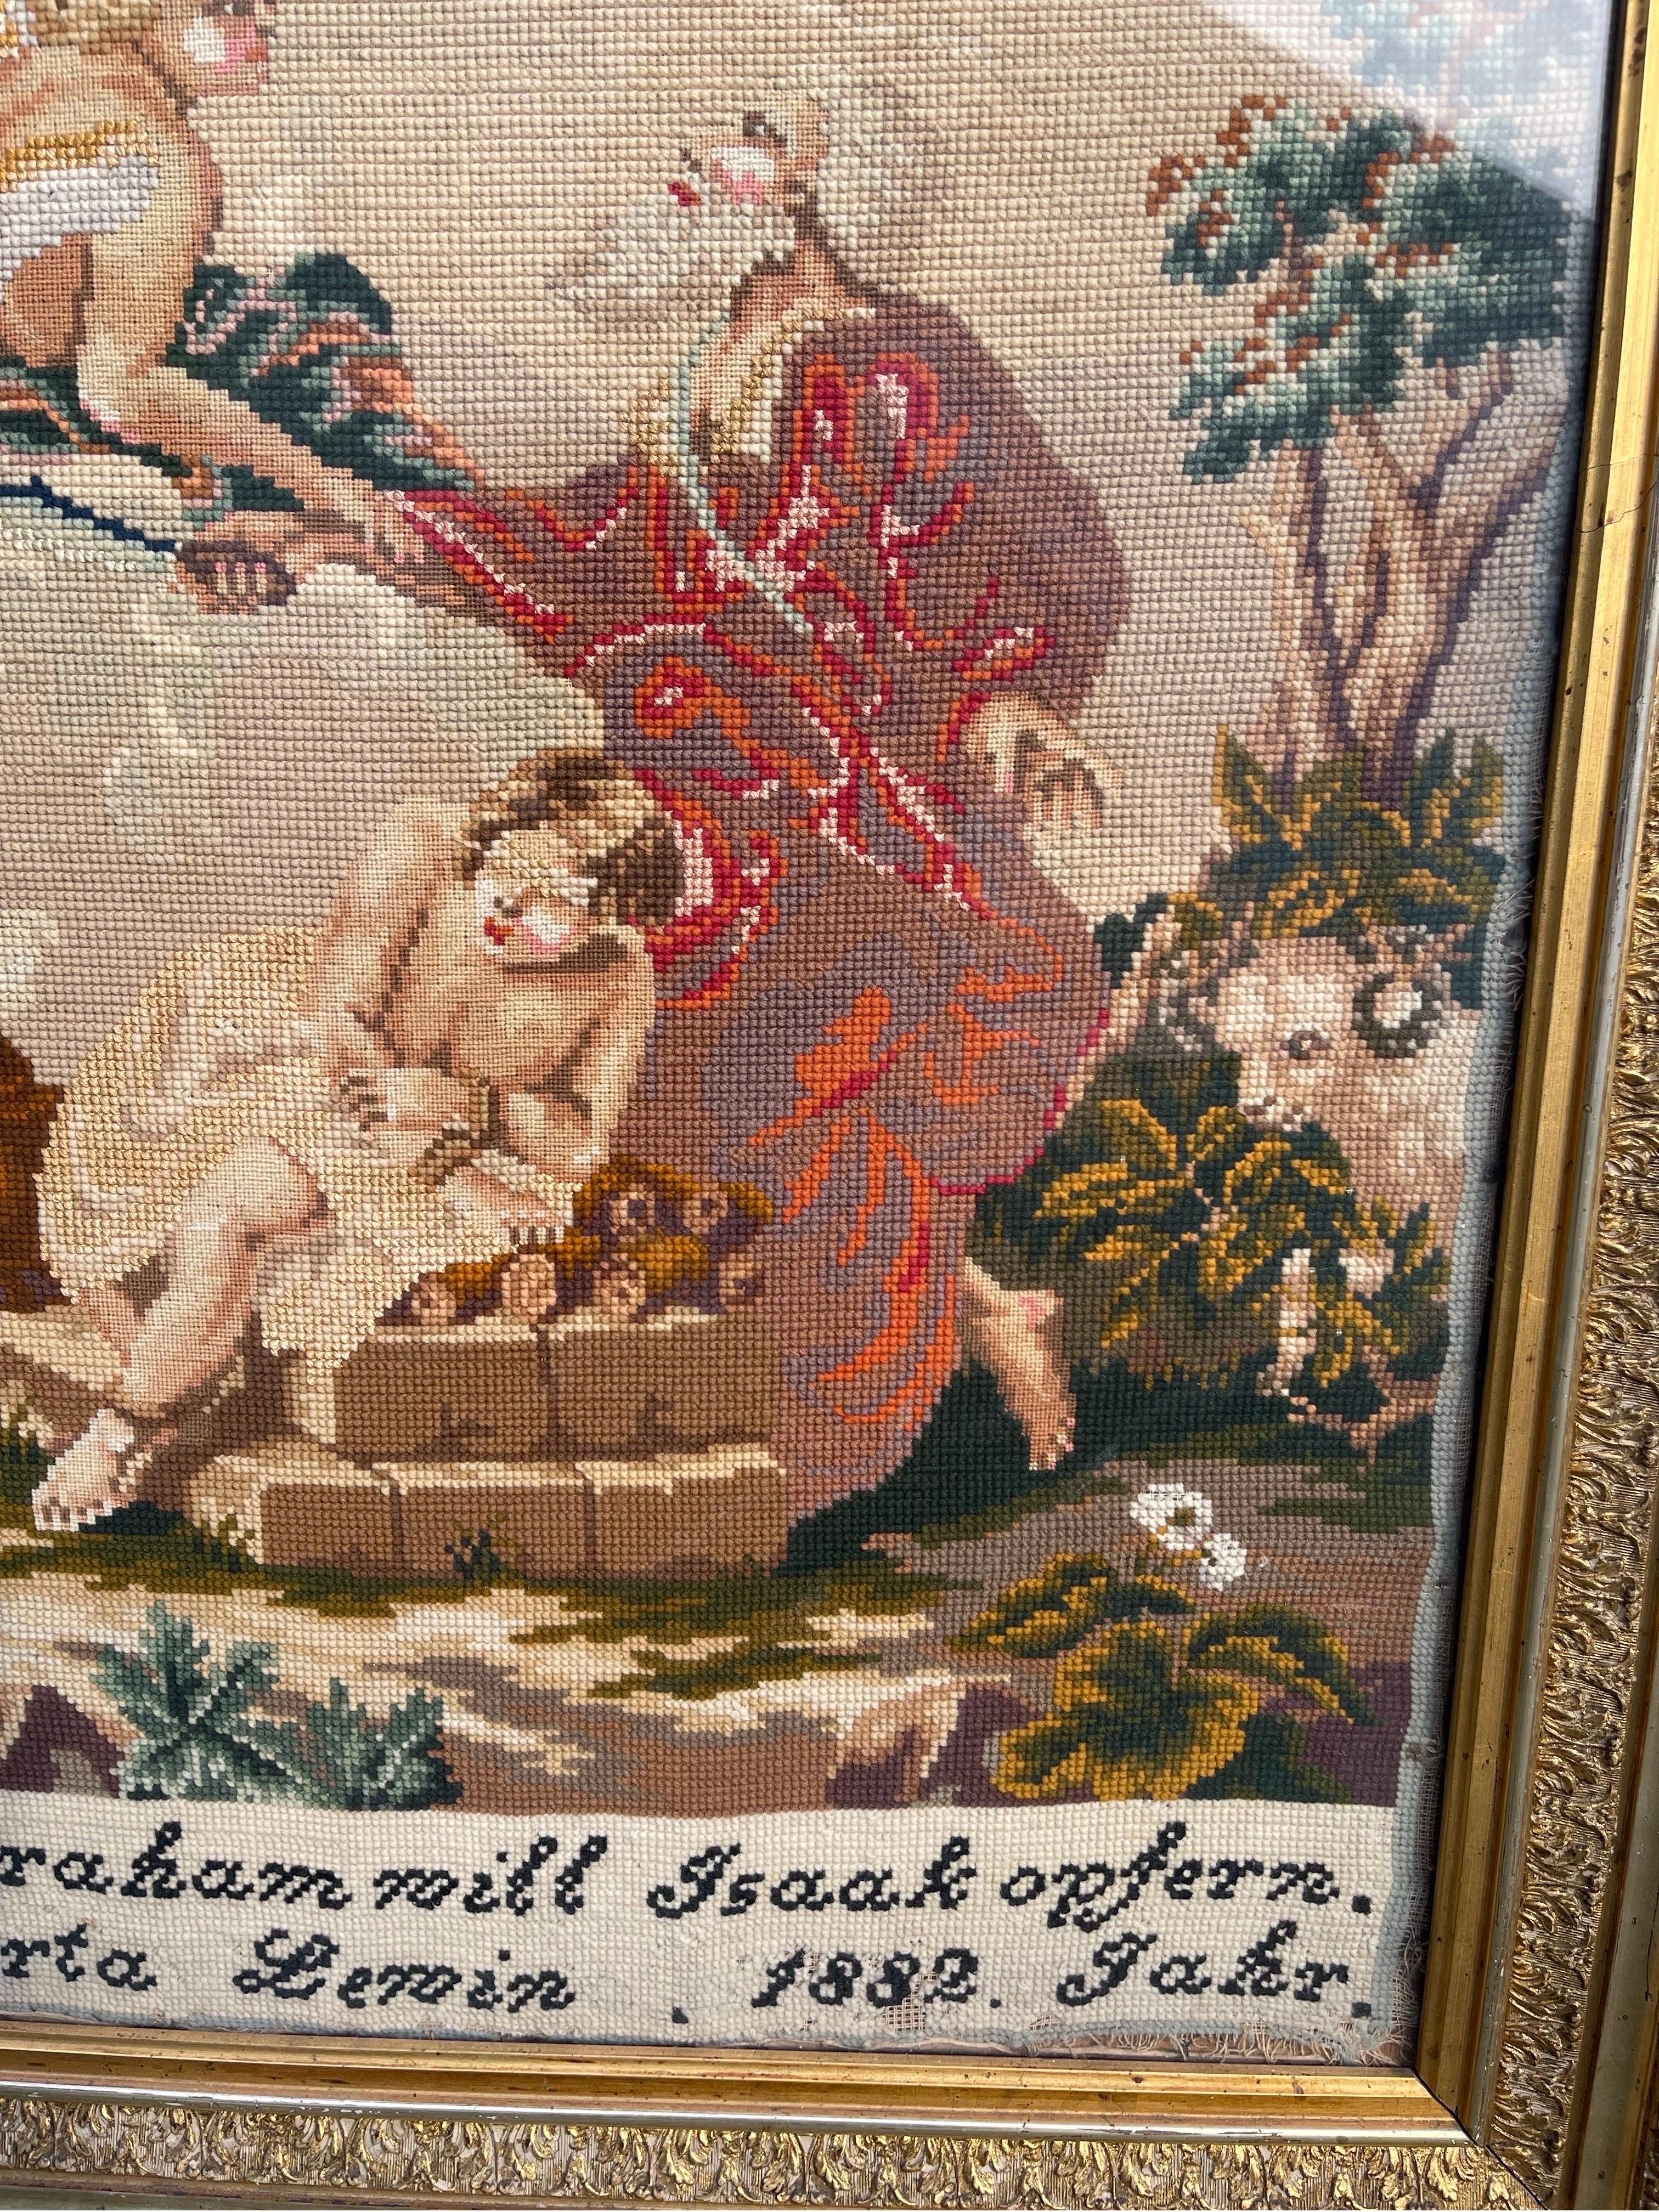 19th Century Needlepoint Depiction of “Binding of Isaac” by Abraham, 1882 For Sale 2